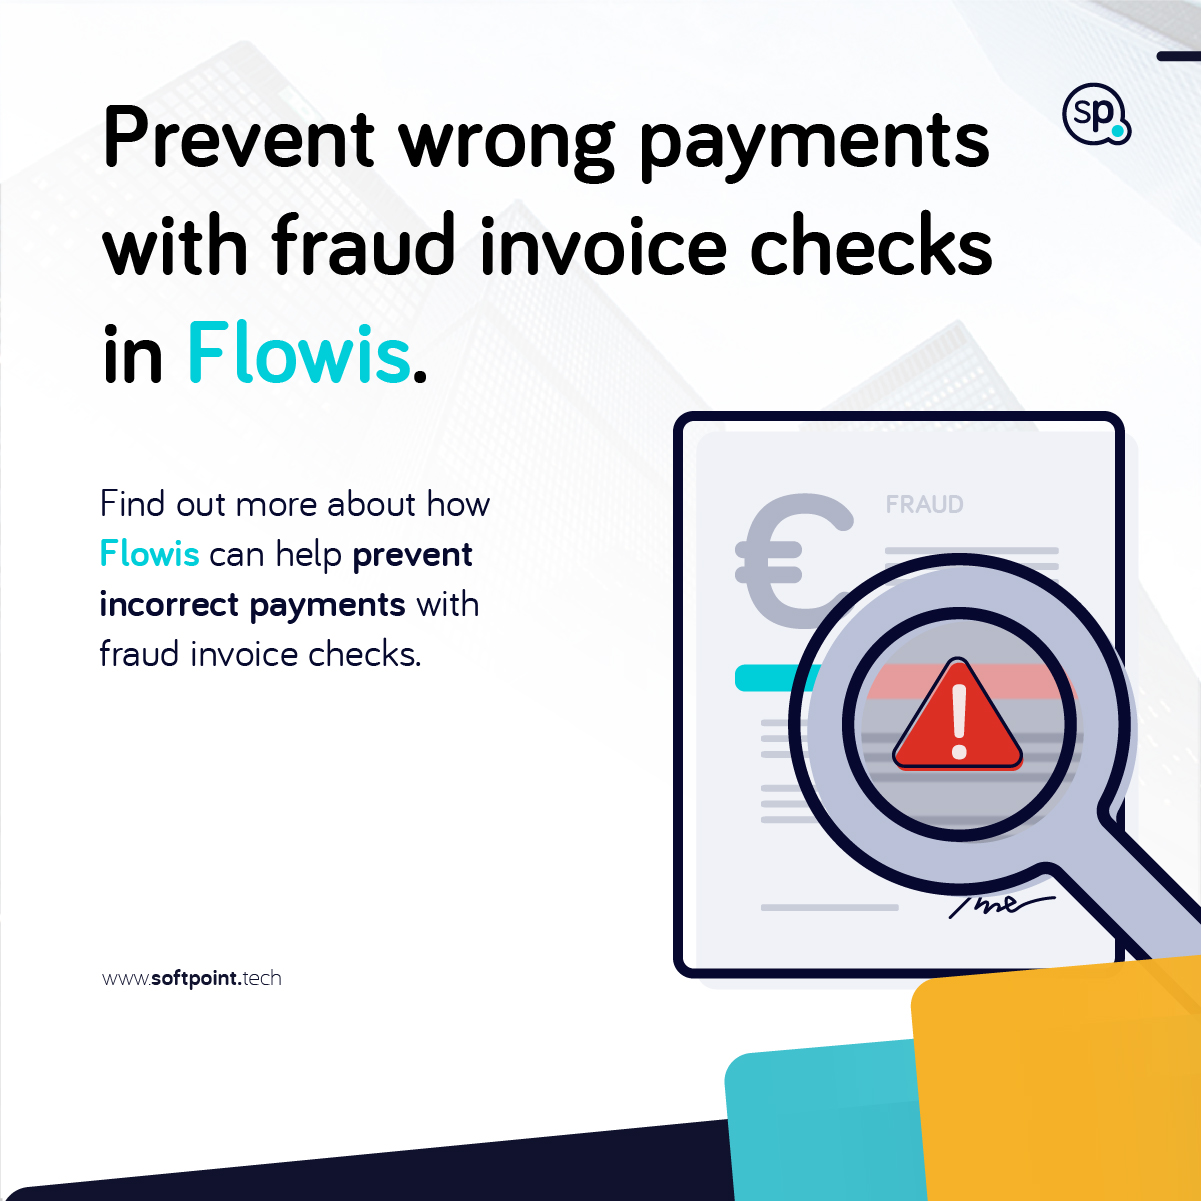 Fraudulent invoice check with Flowis